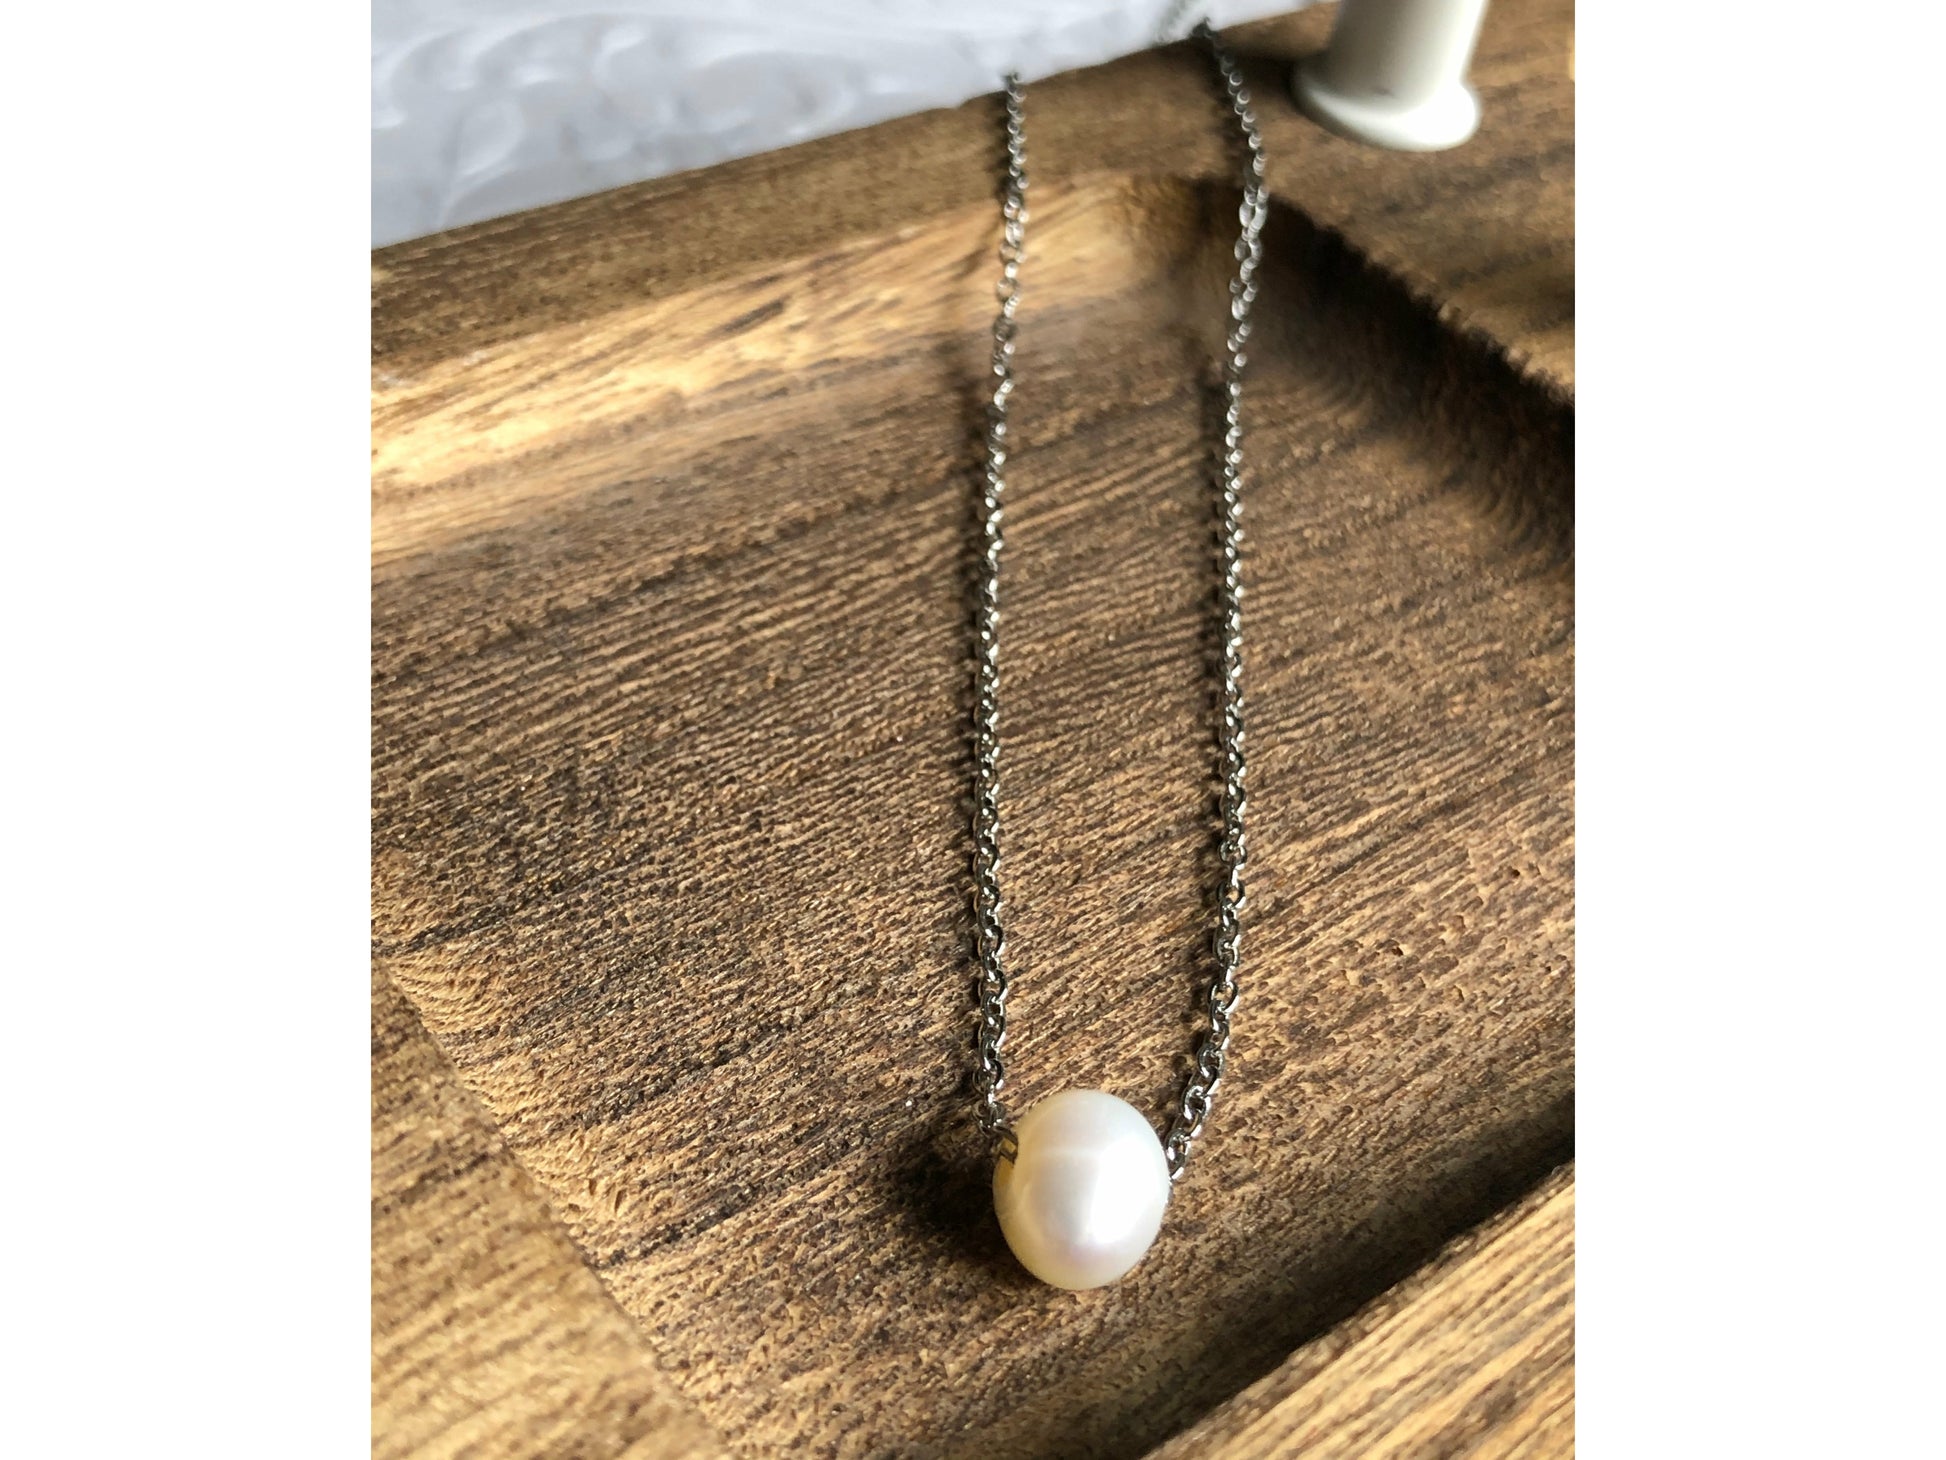 Small simple pearl with the chain of the necklace fed through it